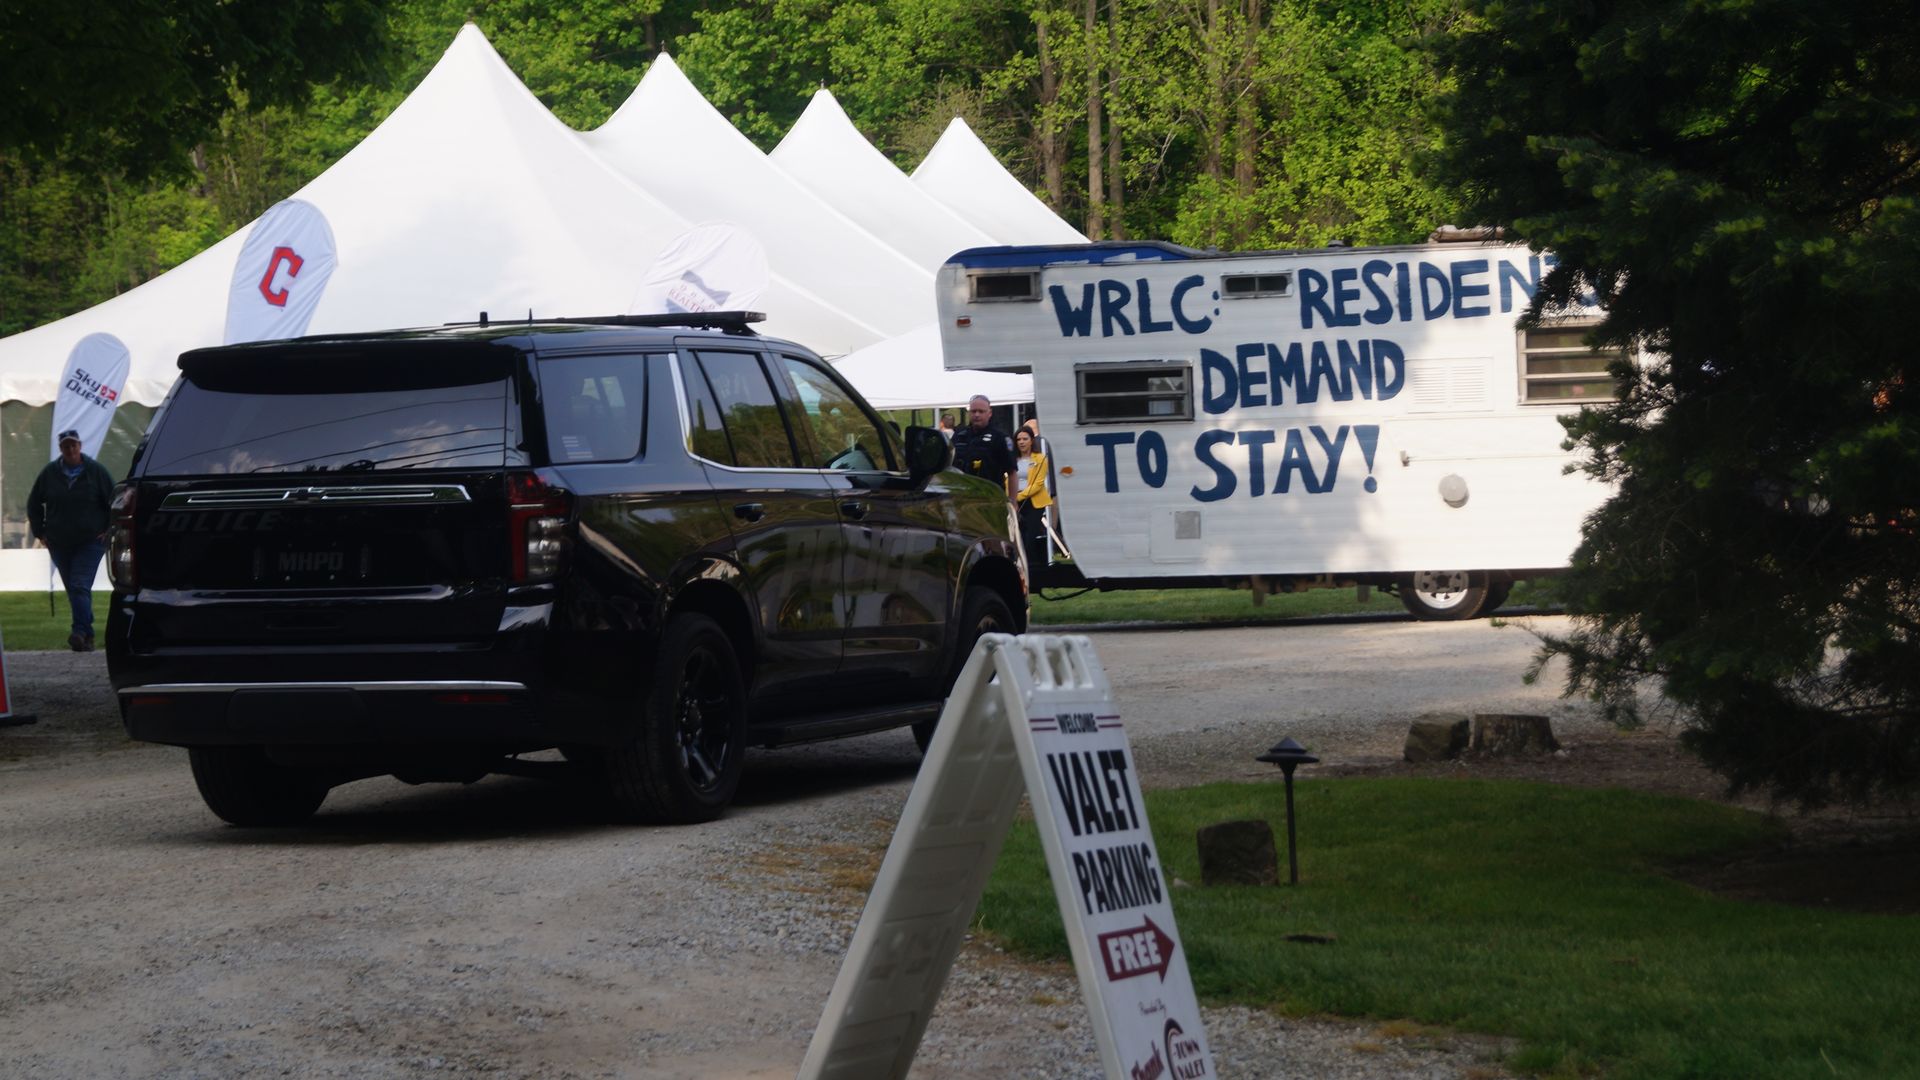 A trailer painted with the message, "WRLC: Residents Demand to Stay" with outdoor tents in the background an police SUV in the foreground